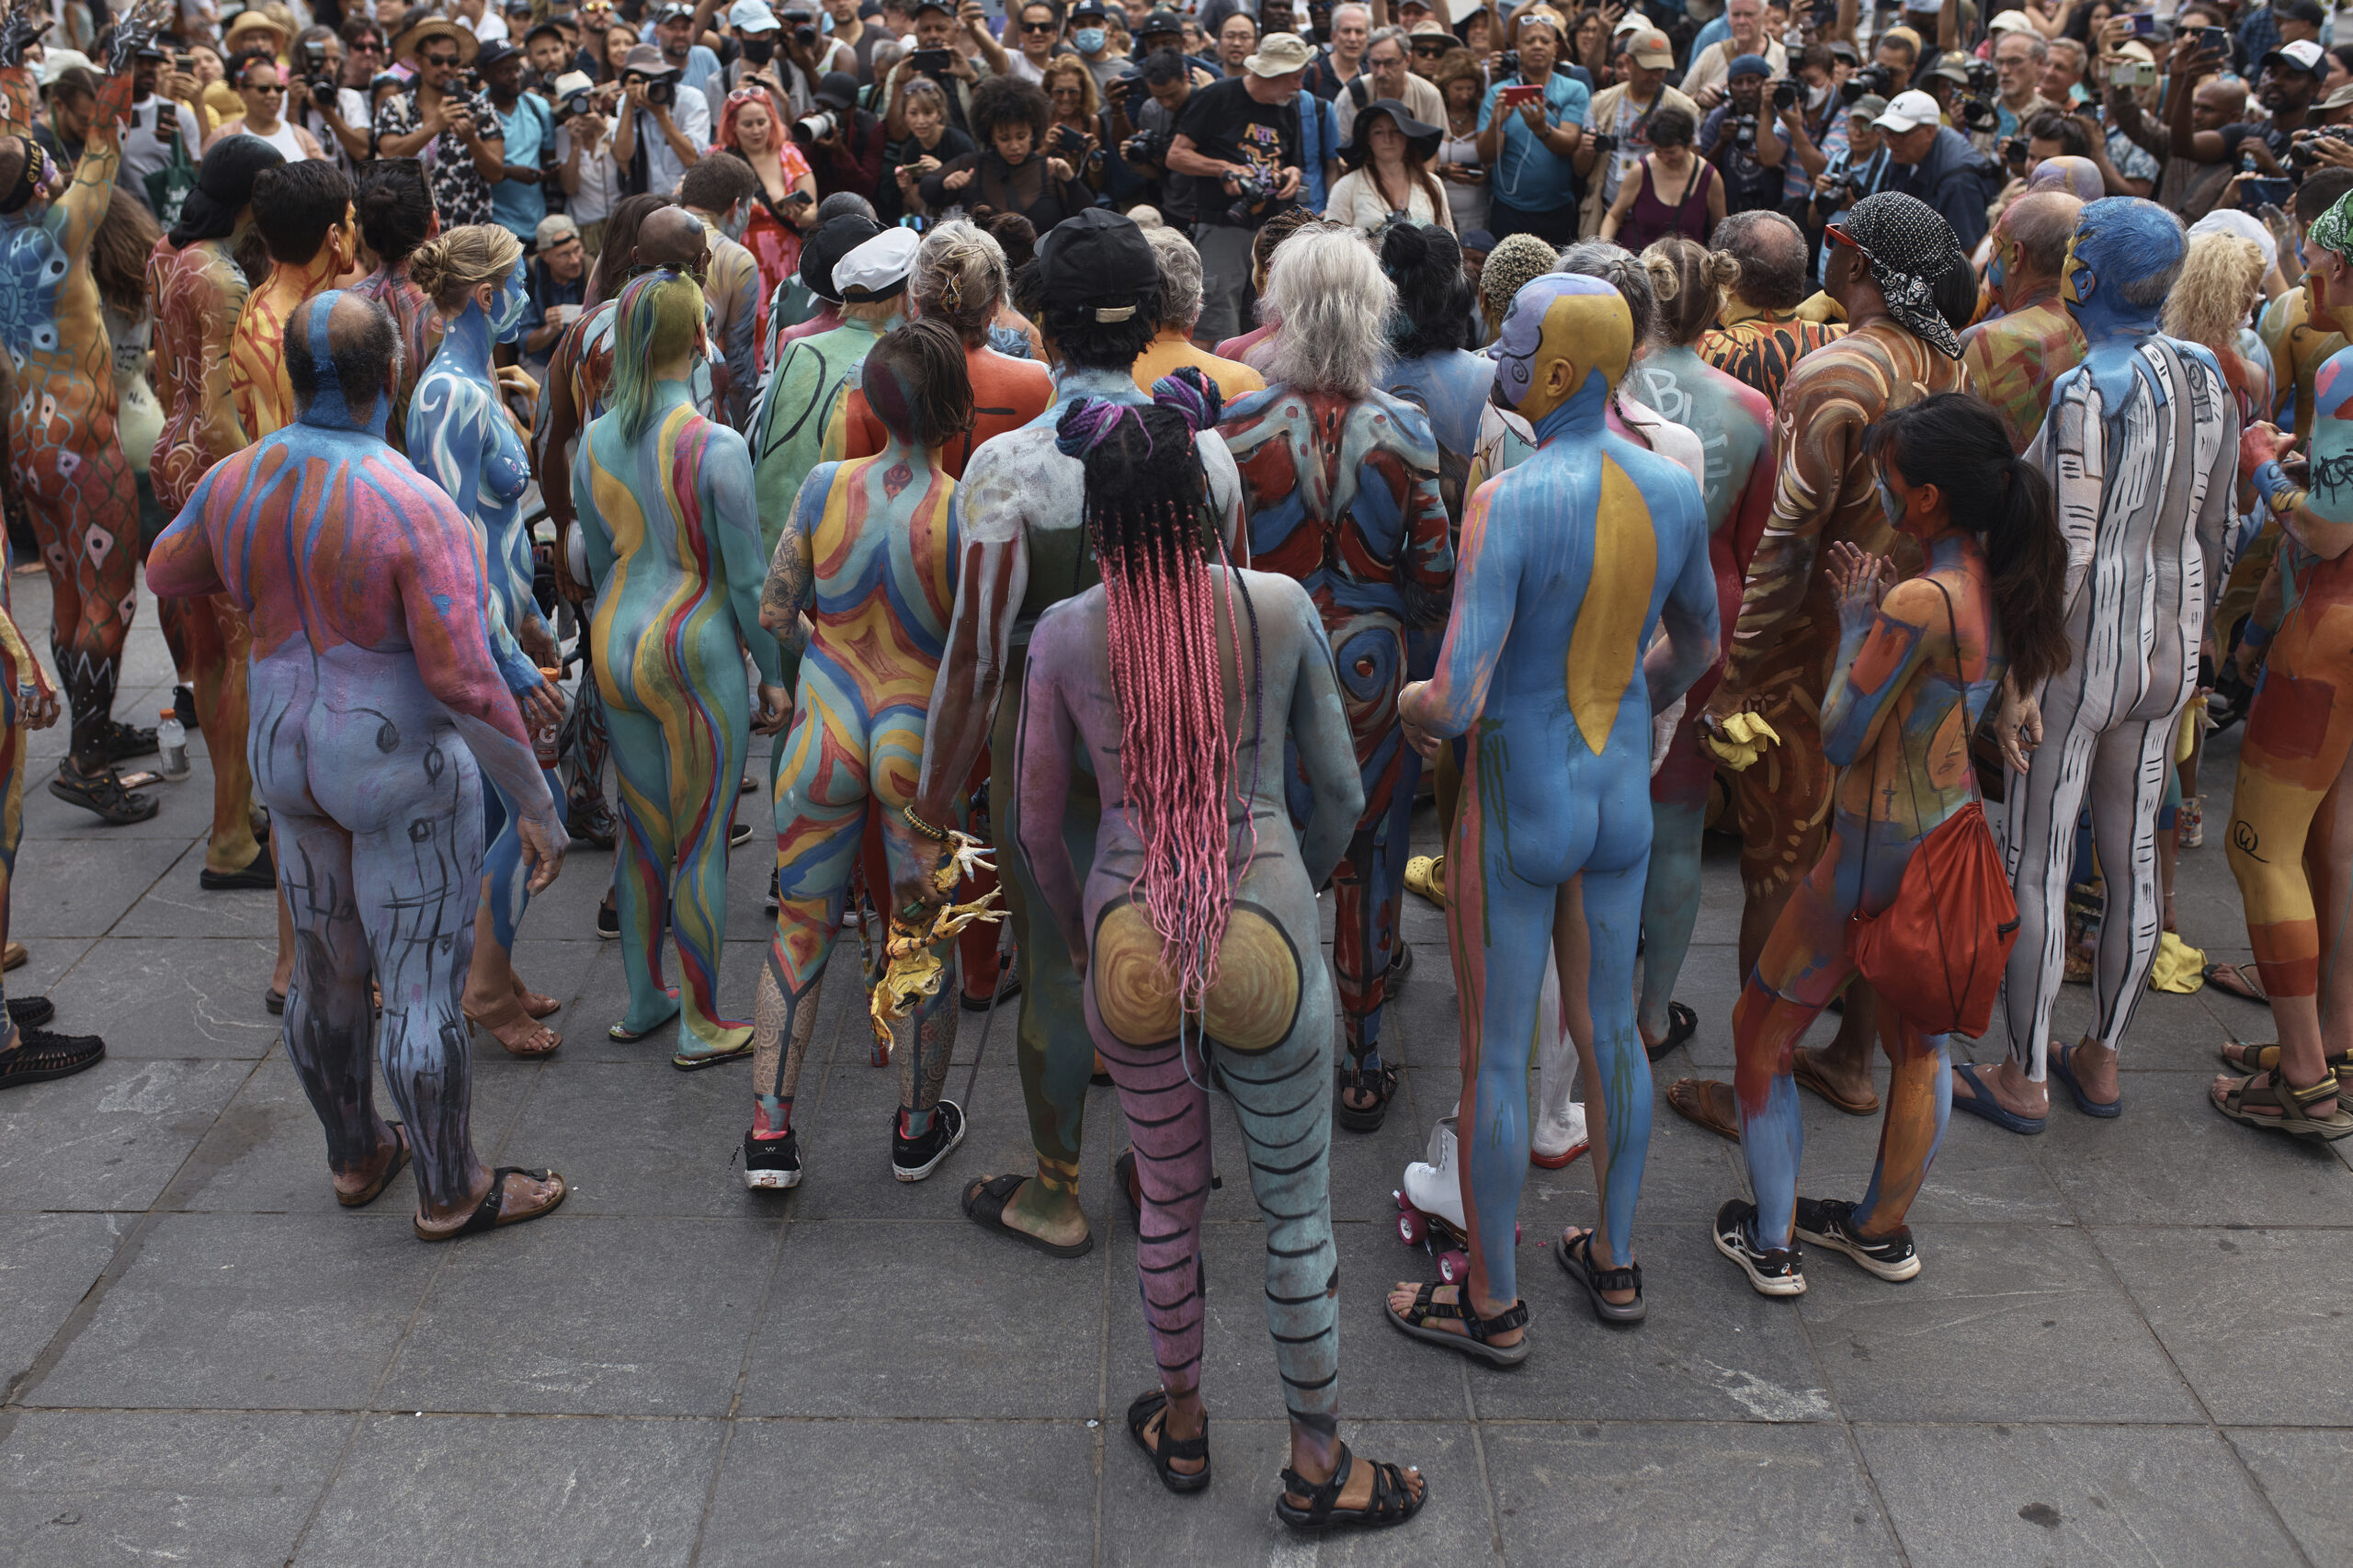 NYC Bodypainting Day blends nudity, jitters: 'If I'm green, no one